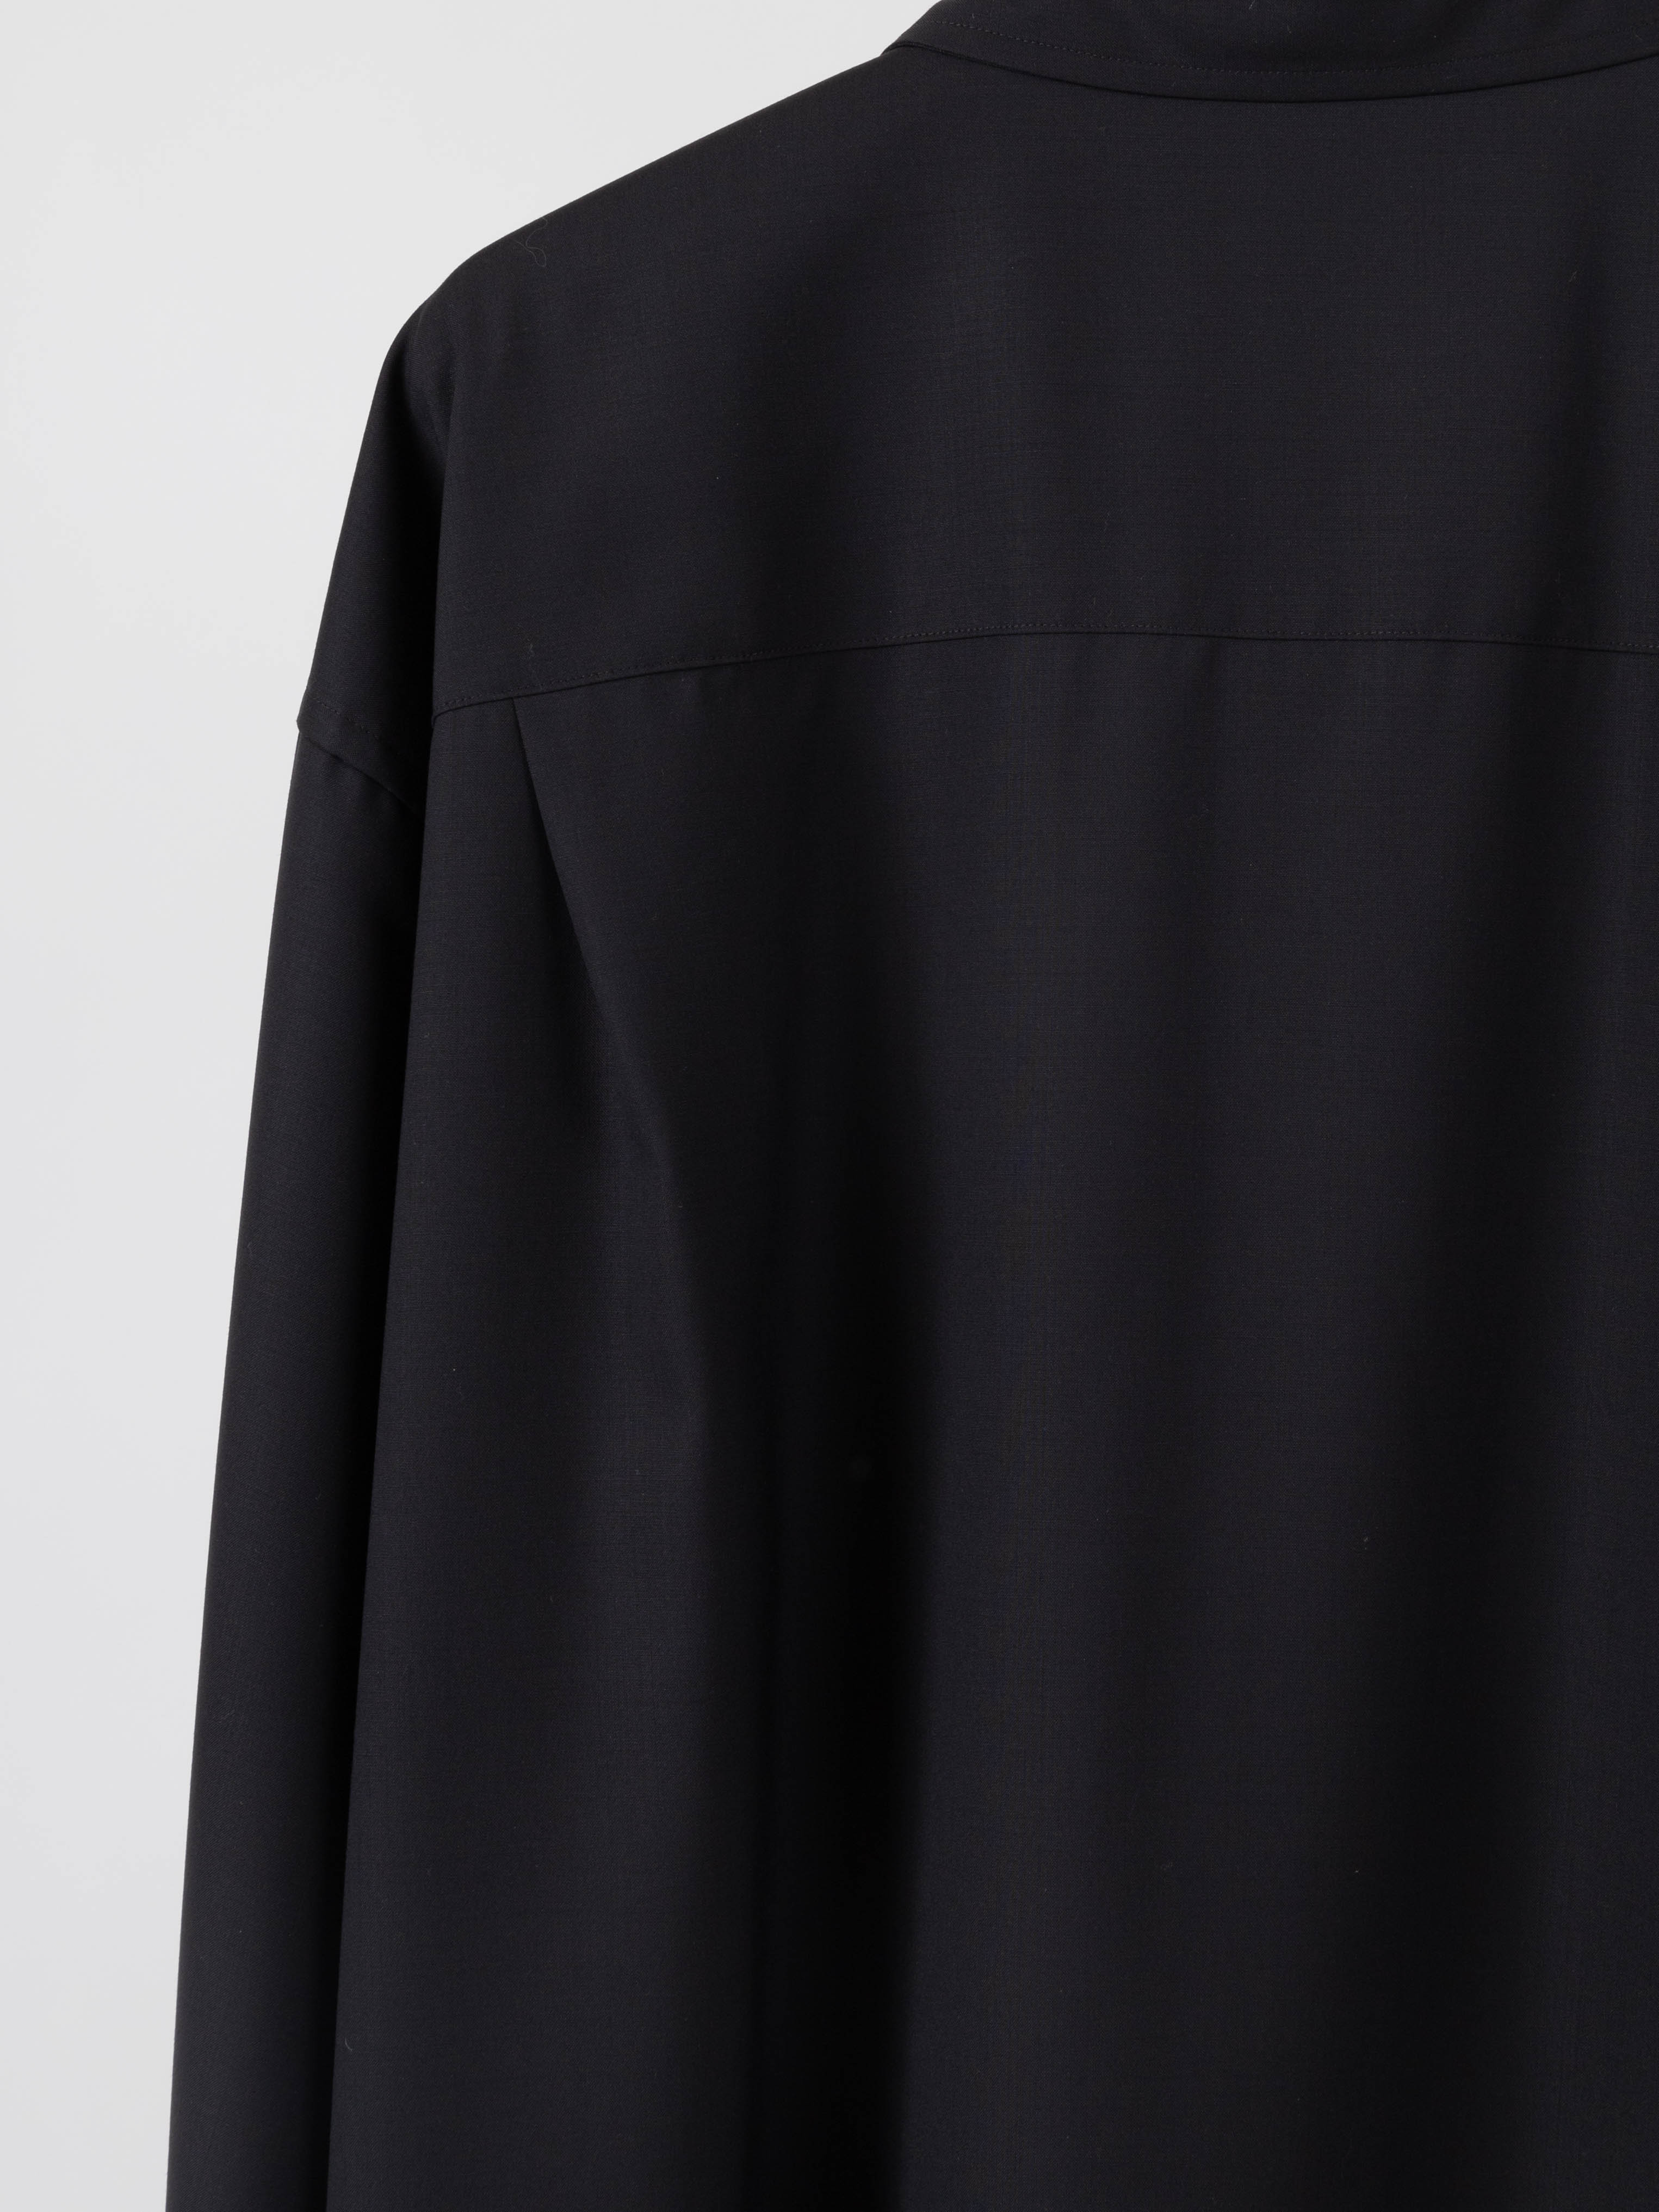 WORSTED WOOL SHIRTS｜FADED BLACK